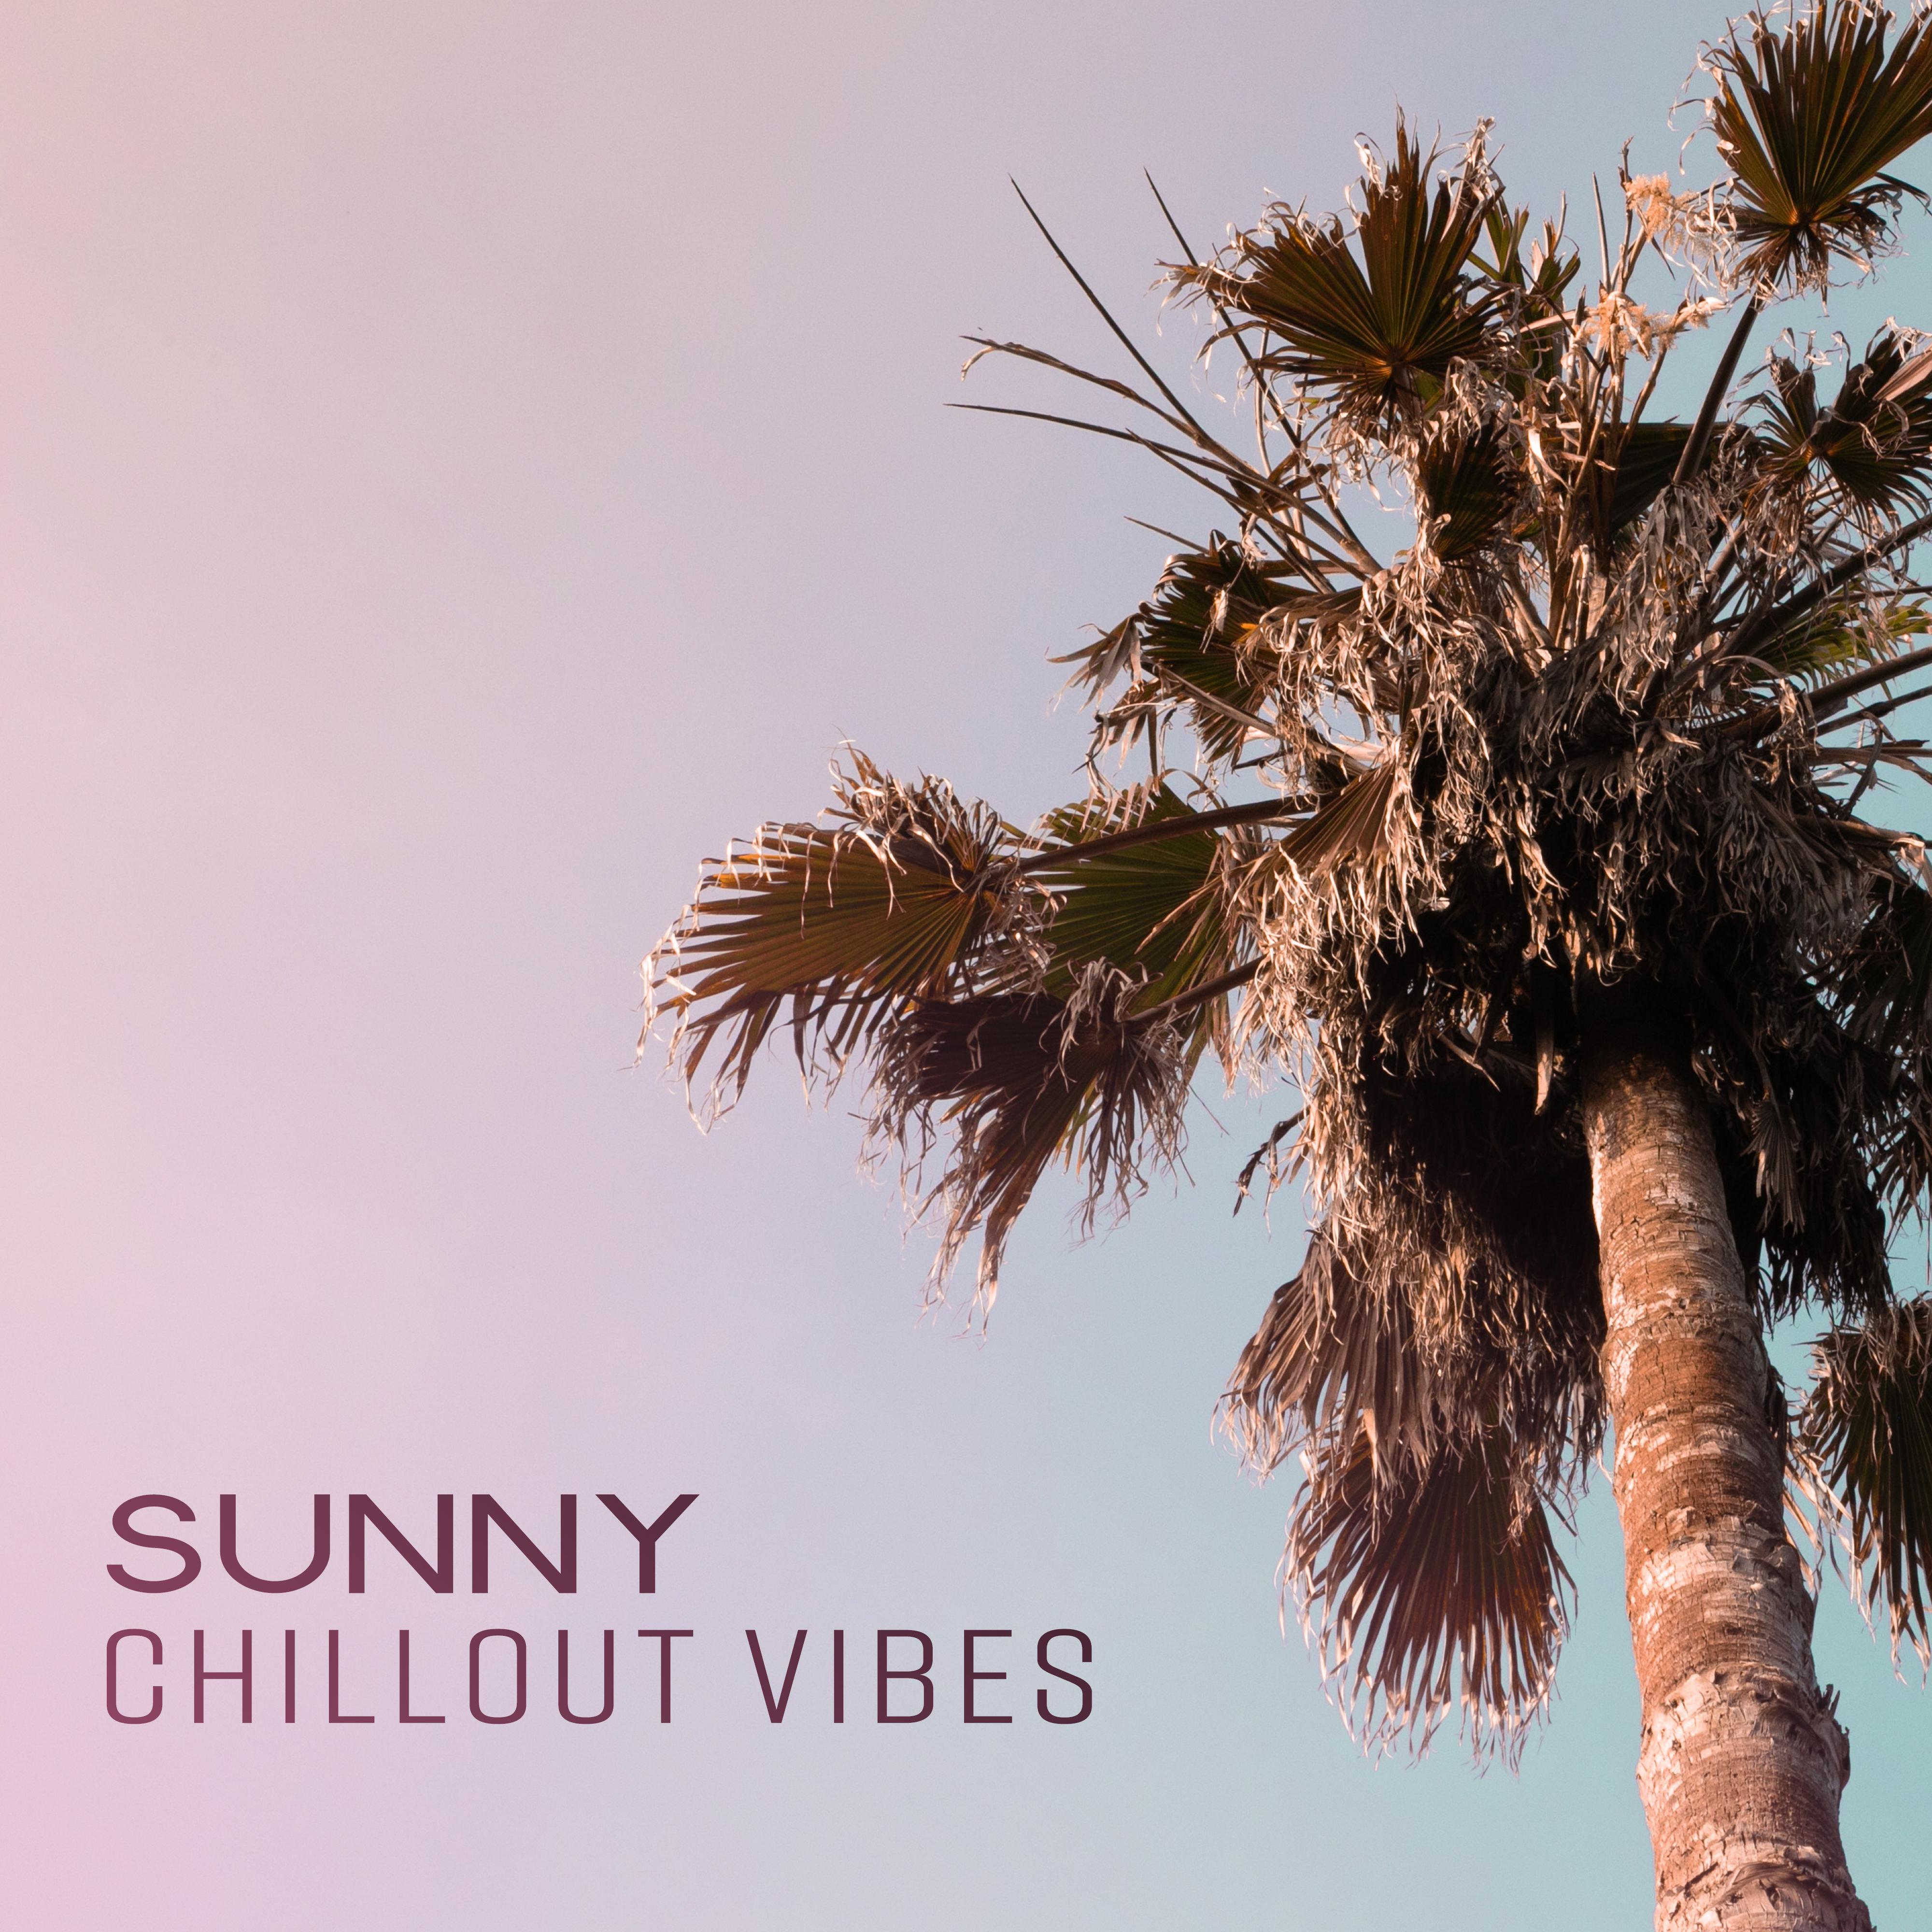 Sunny Chillout Vibes